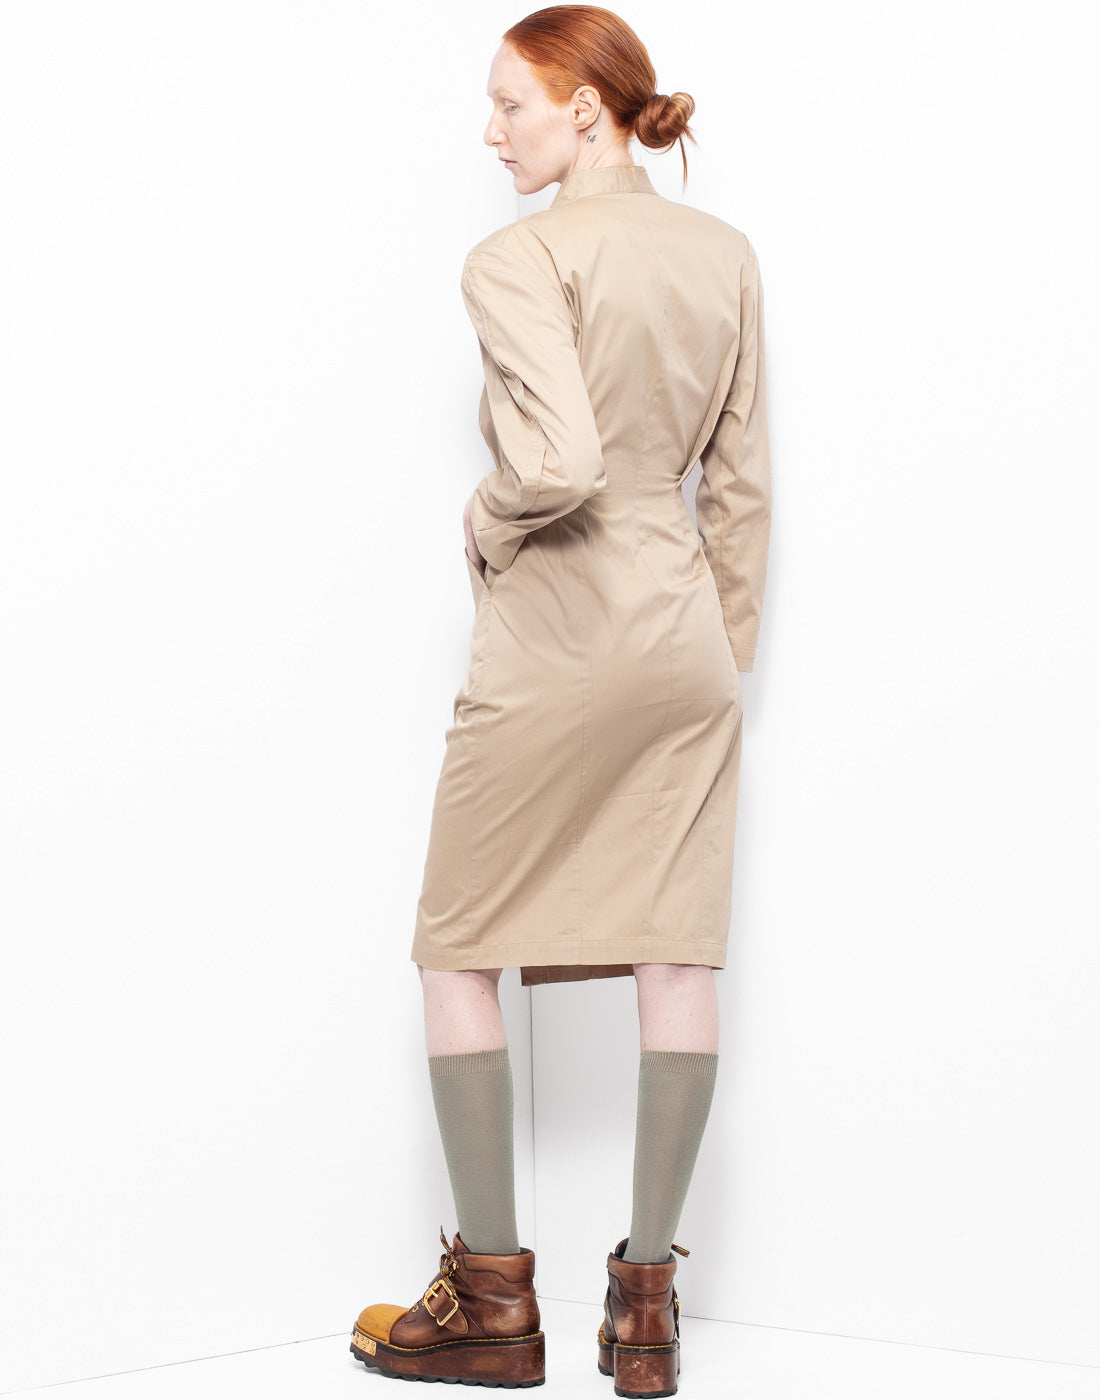 Iconic camel-colored high-neck mid lenght dress from Thierry Mugler archives